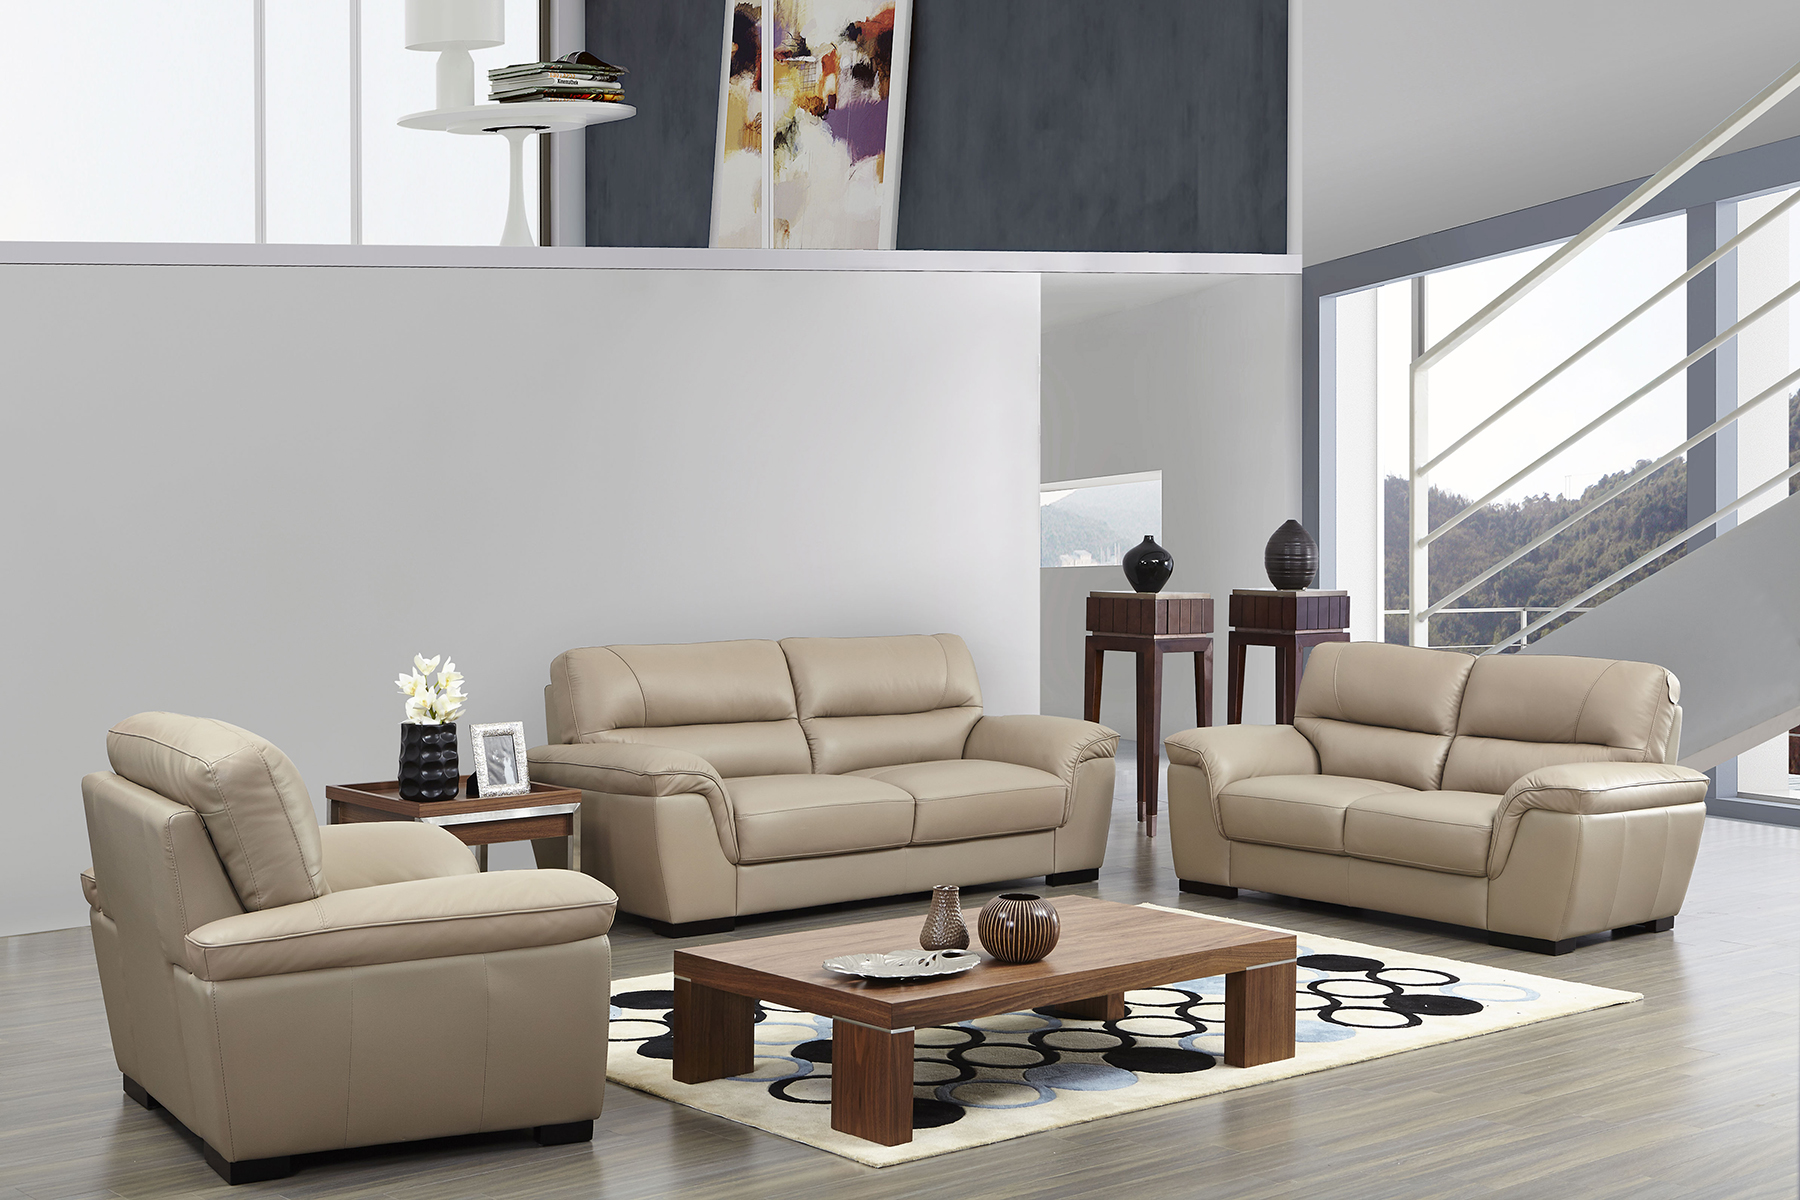 Wtsenates Exciting Living Room Beige Leather Sofa In Collection 6151